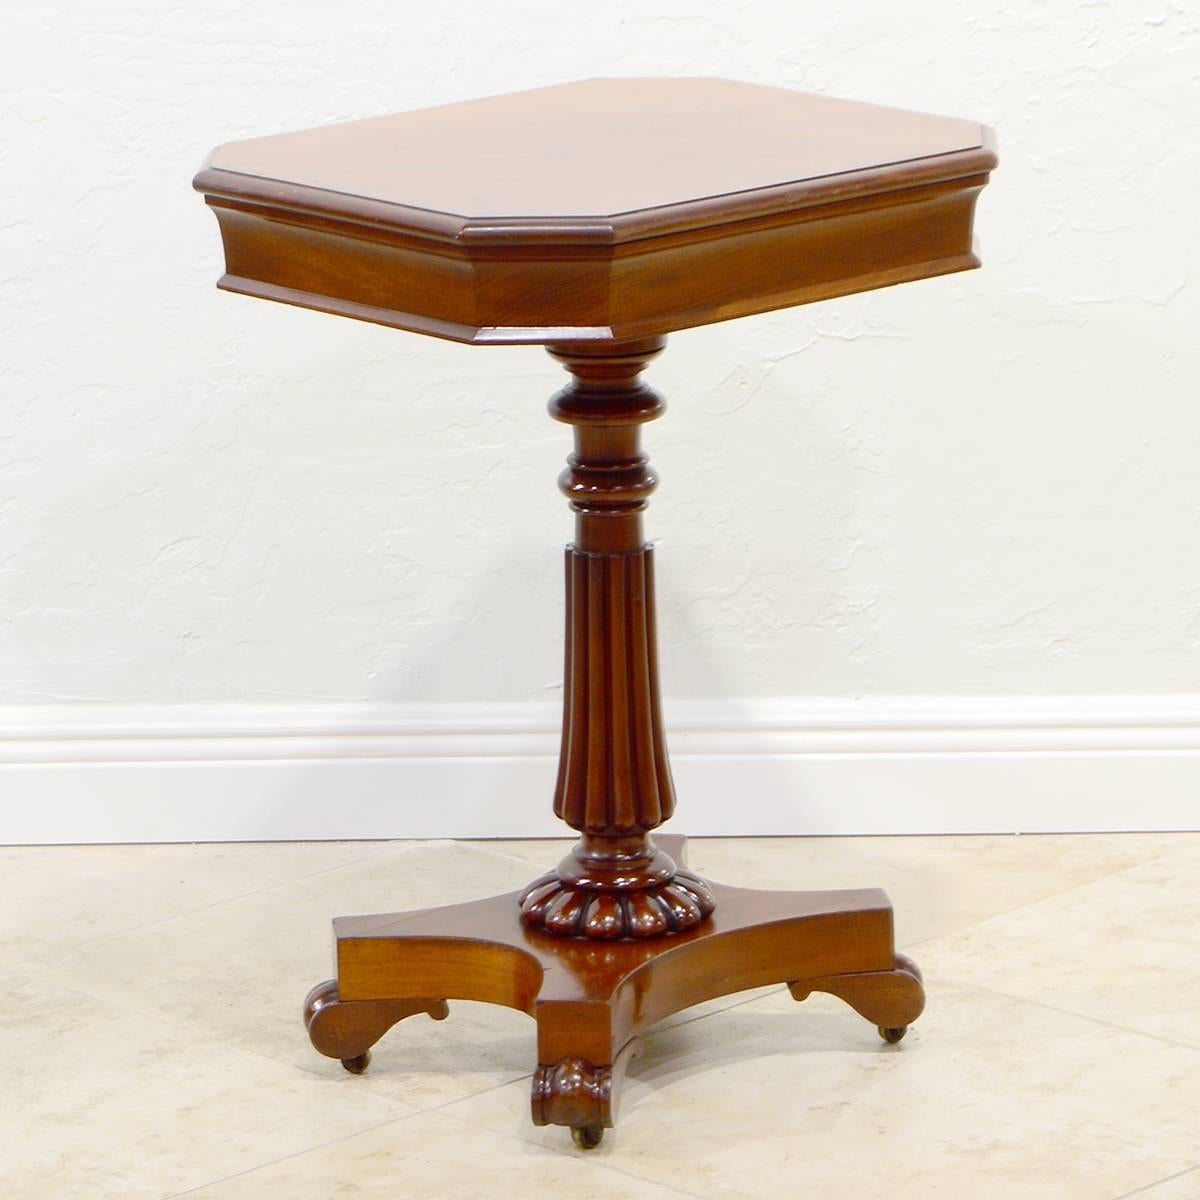 English Mid-19th Century William IV Mahogany Pedestal Table with Frieze Drawer 1